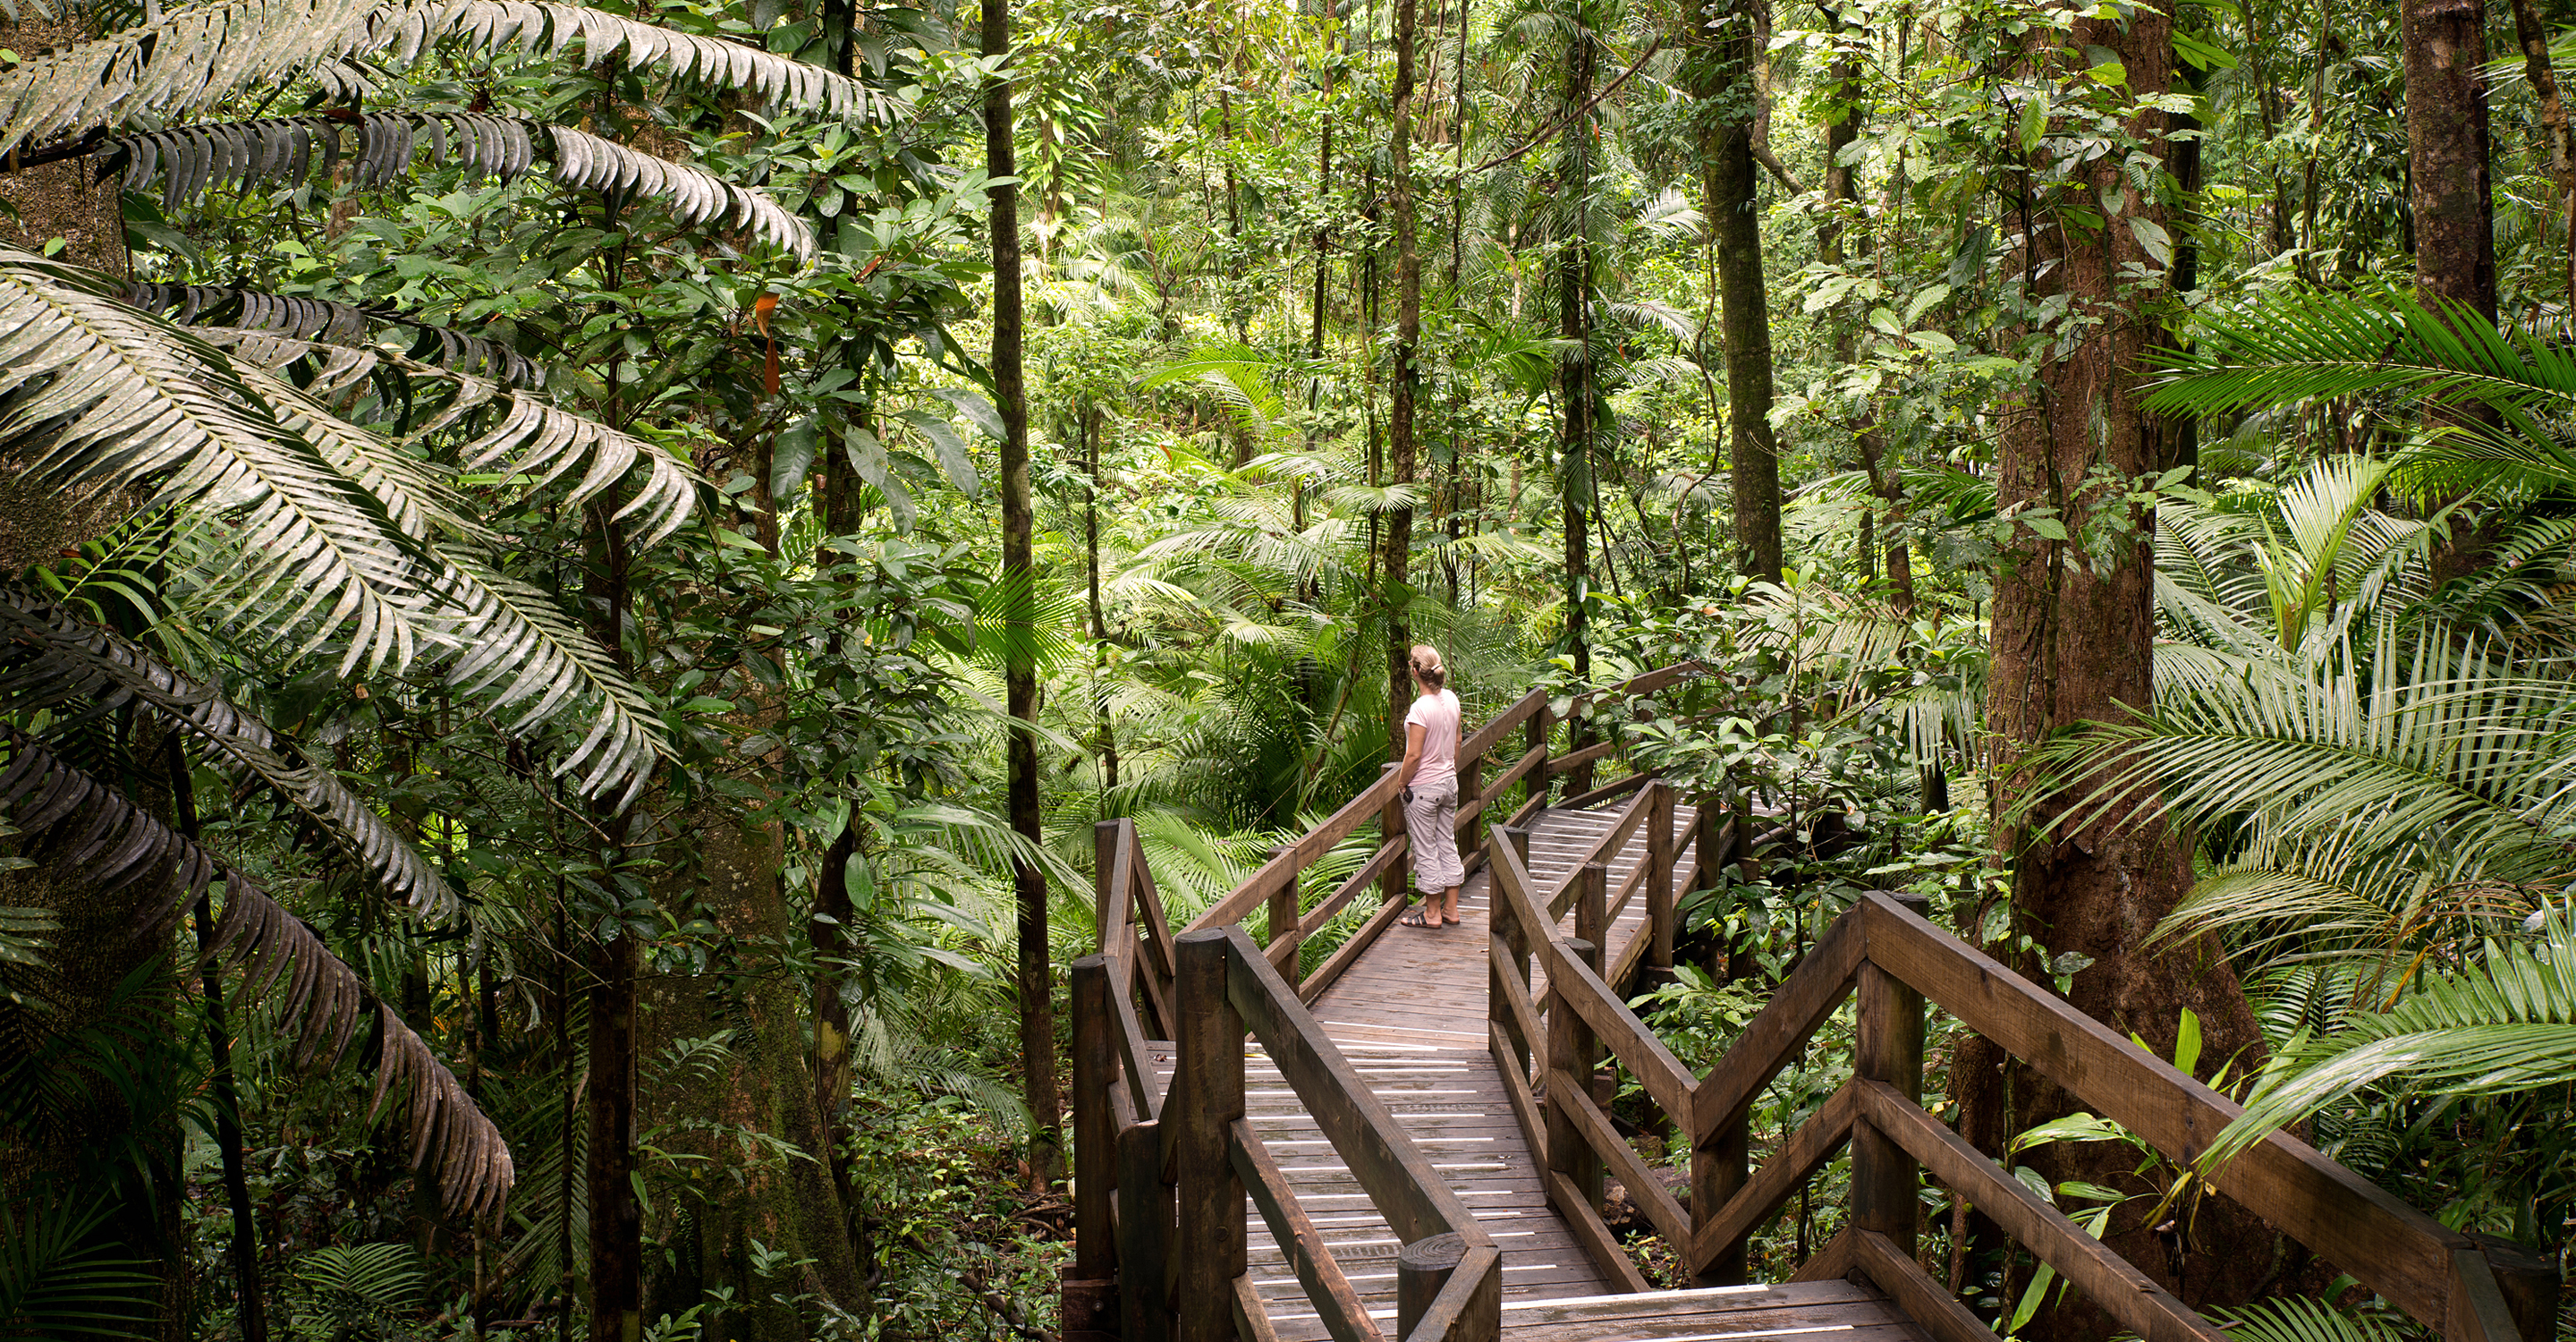 Travelers stand on a bridge in the rain forest of Daintree National Park, Queensland, Australia